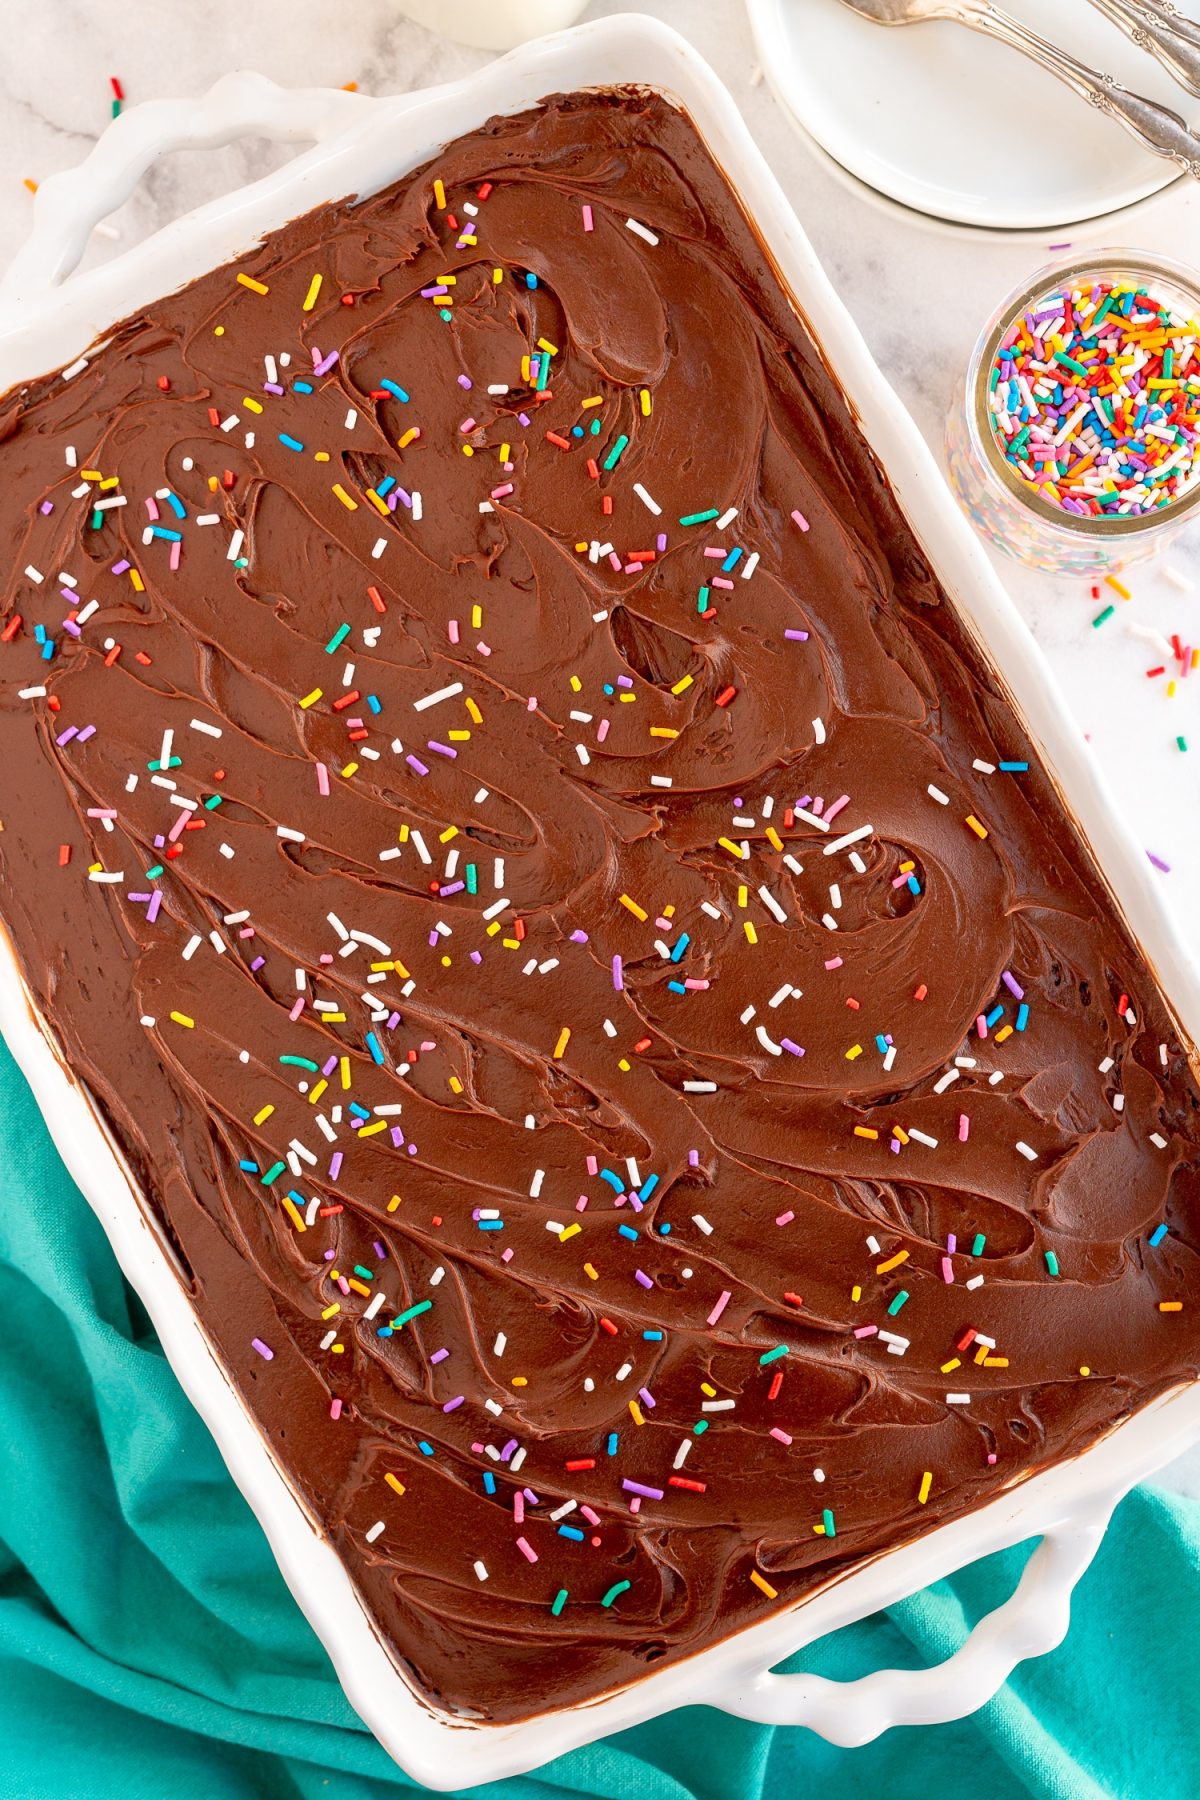 Chocolate cake in 9 x 13 inch pan with rainbow sprinkles